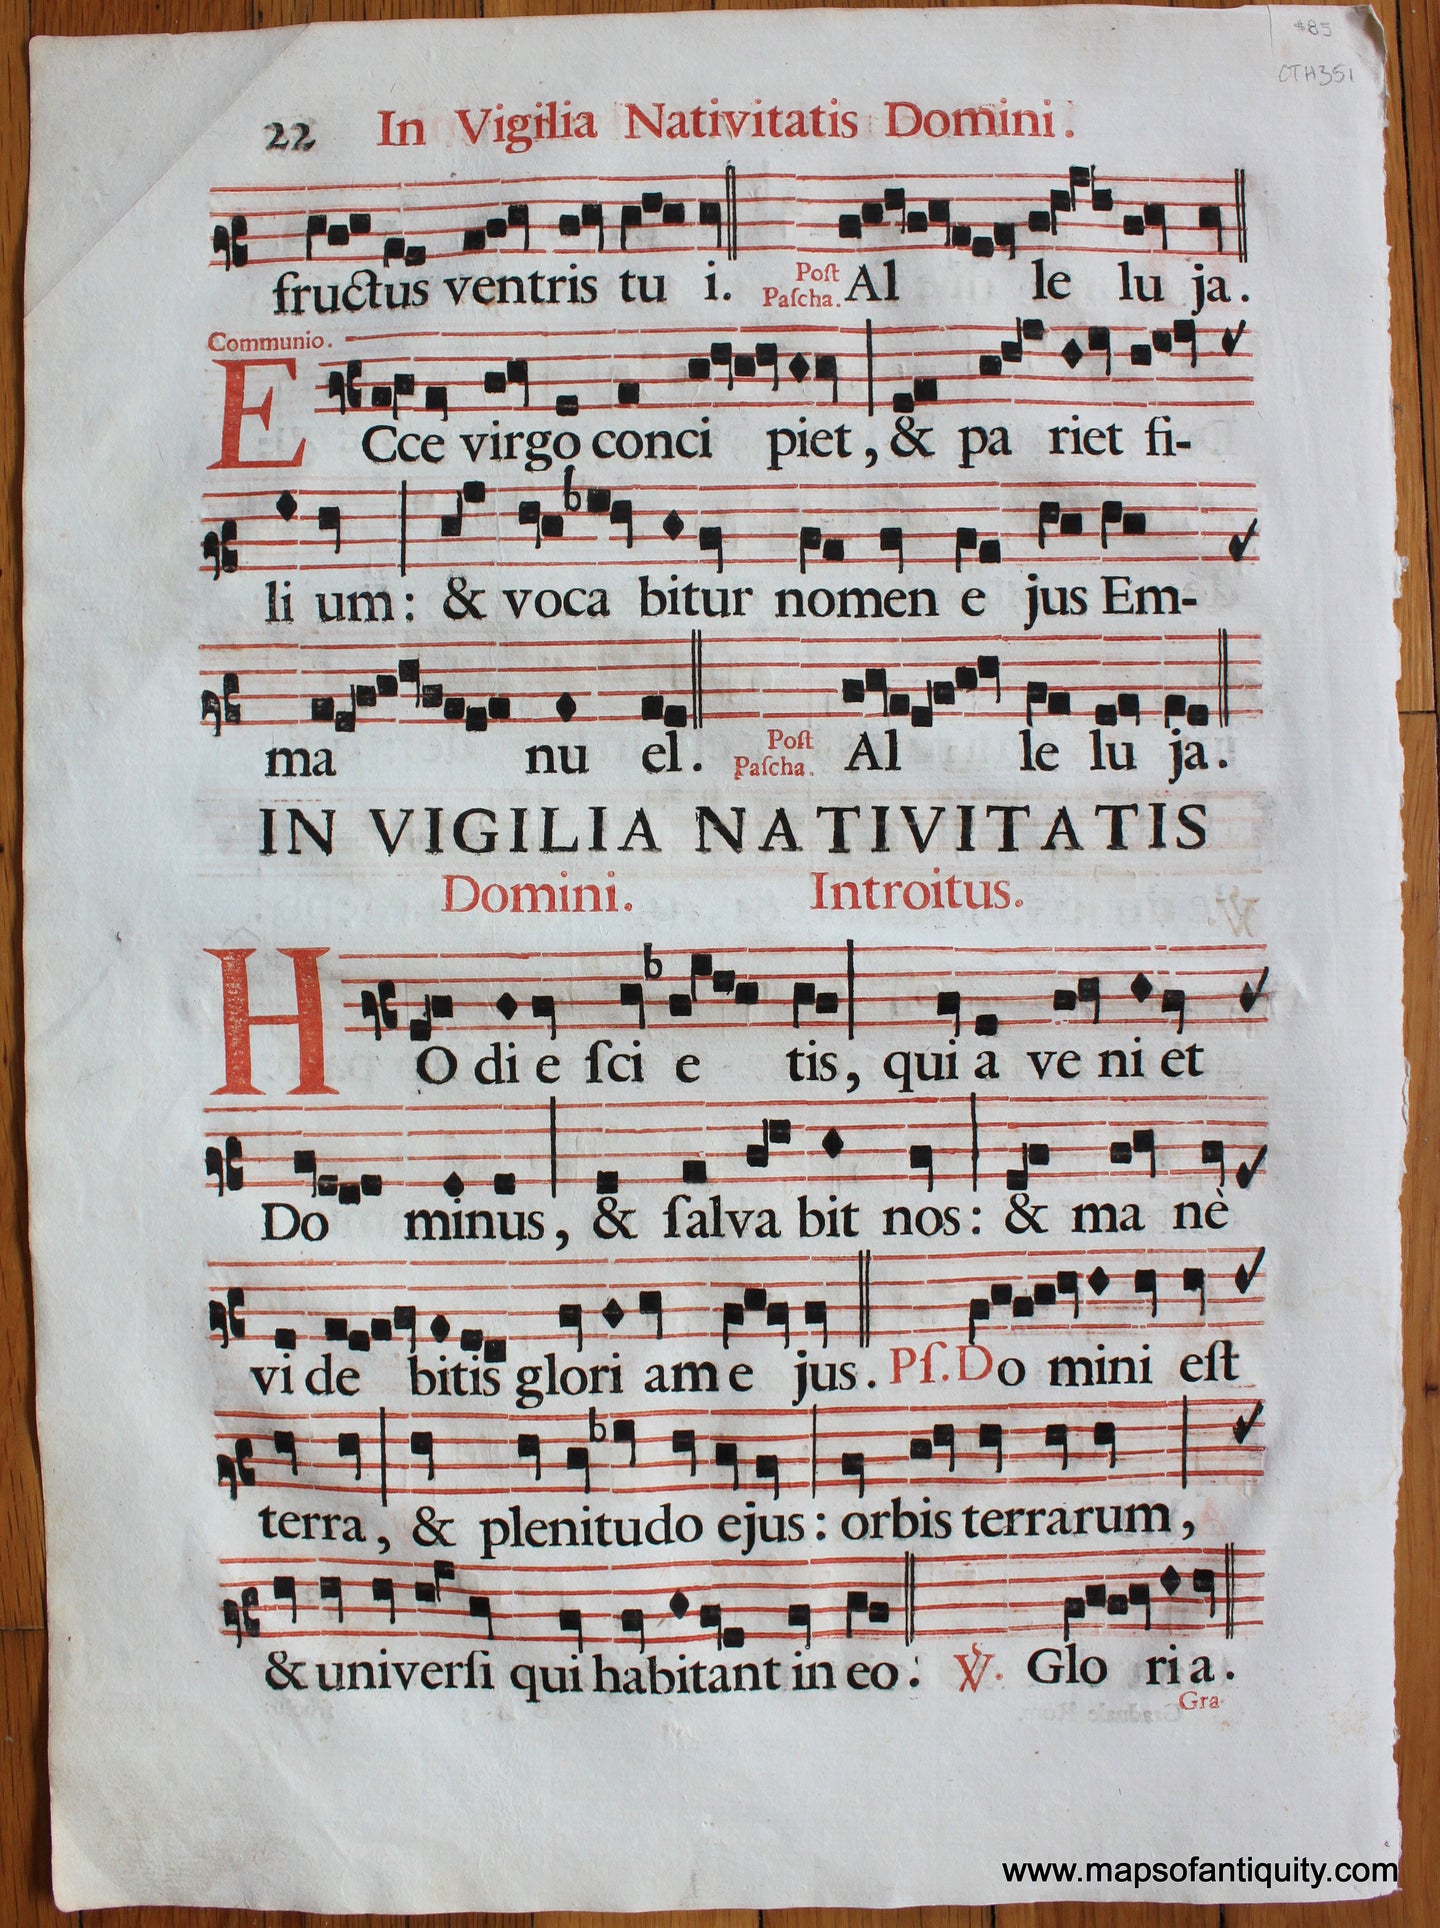 Antique-Sheet-Music-on-Paper-Antique-Sheet-Music-Dominica-iv.-Adventus.-c.-16th-century-Unknown-Antique-Sheet-Music-1500s-16th-century-Maps-of-Antiquity